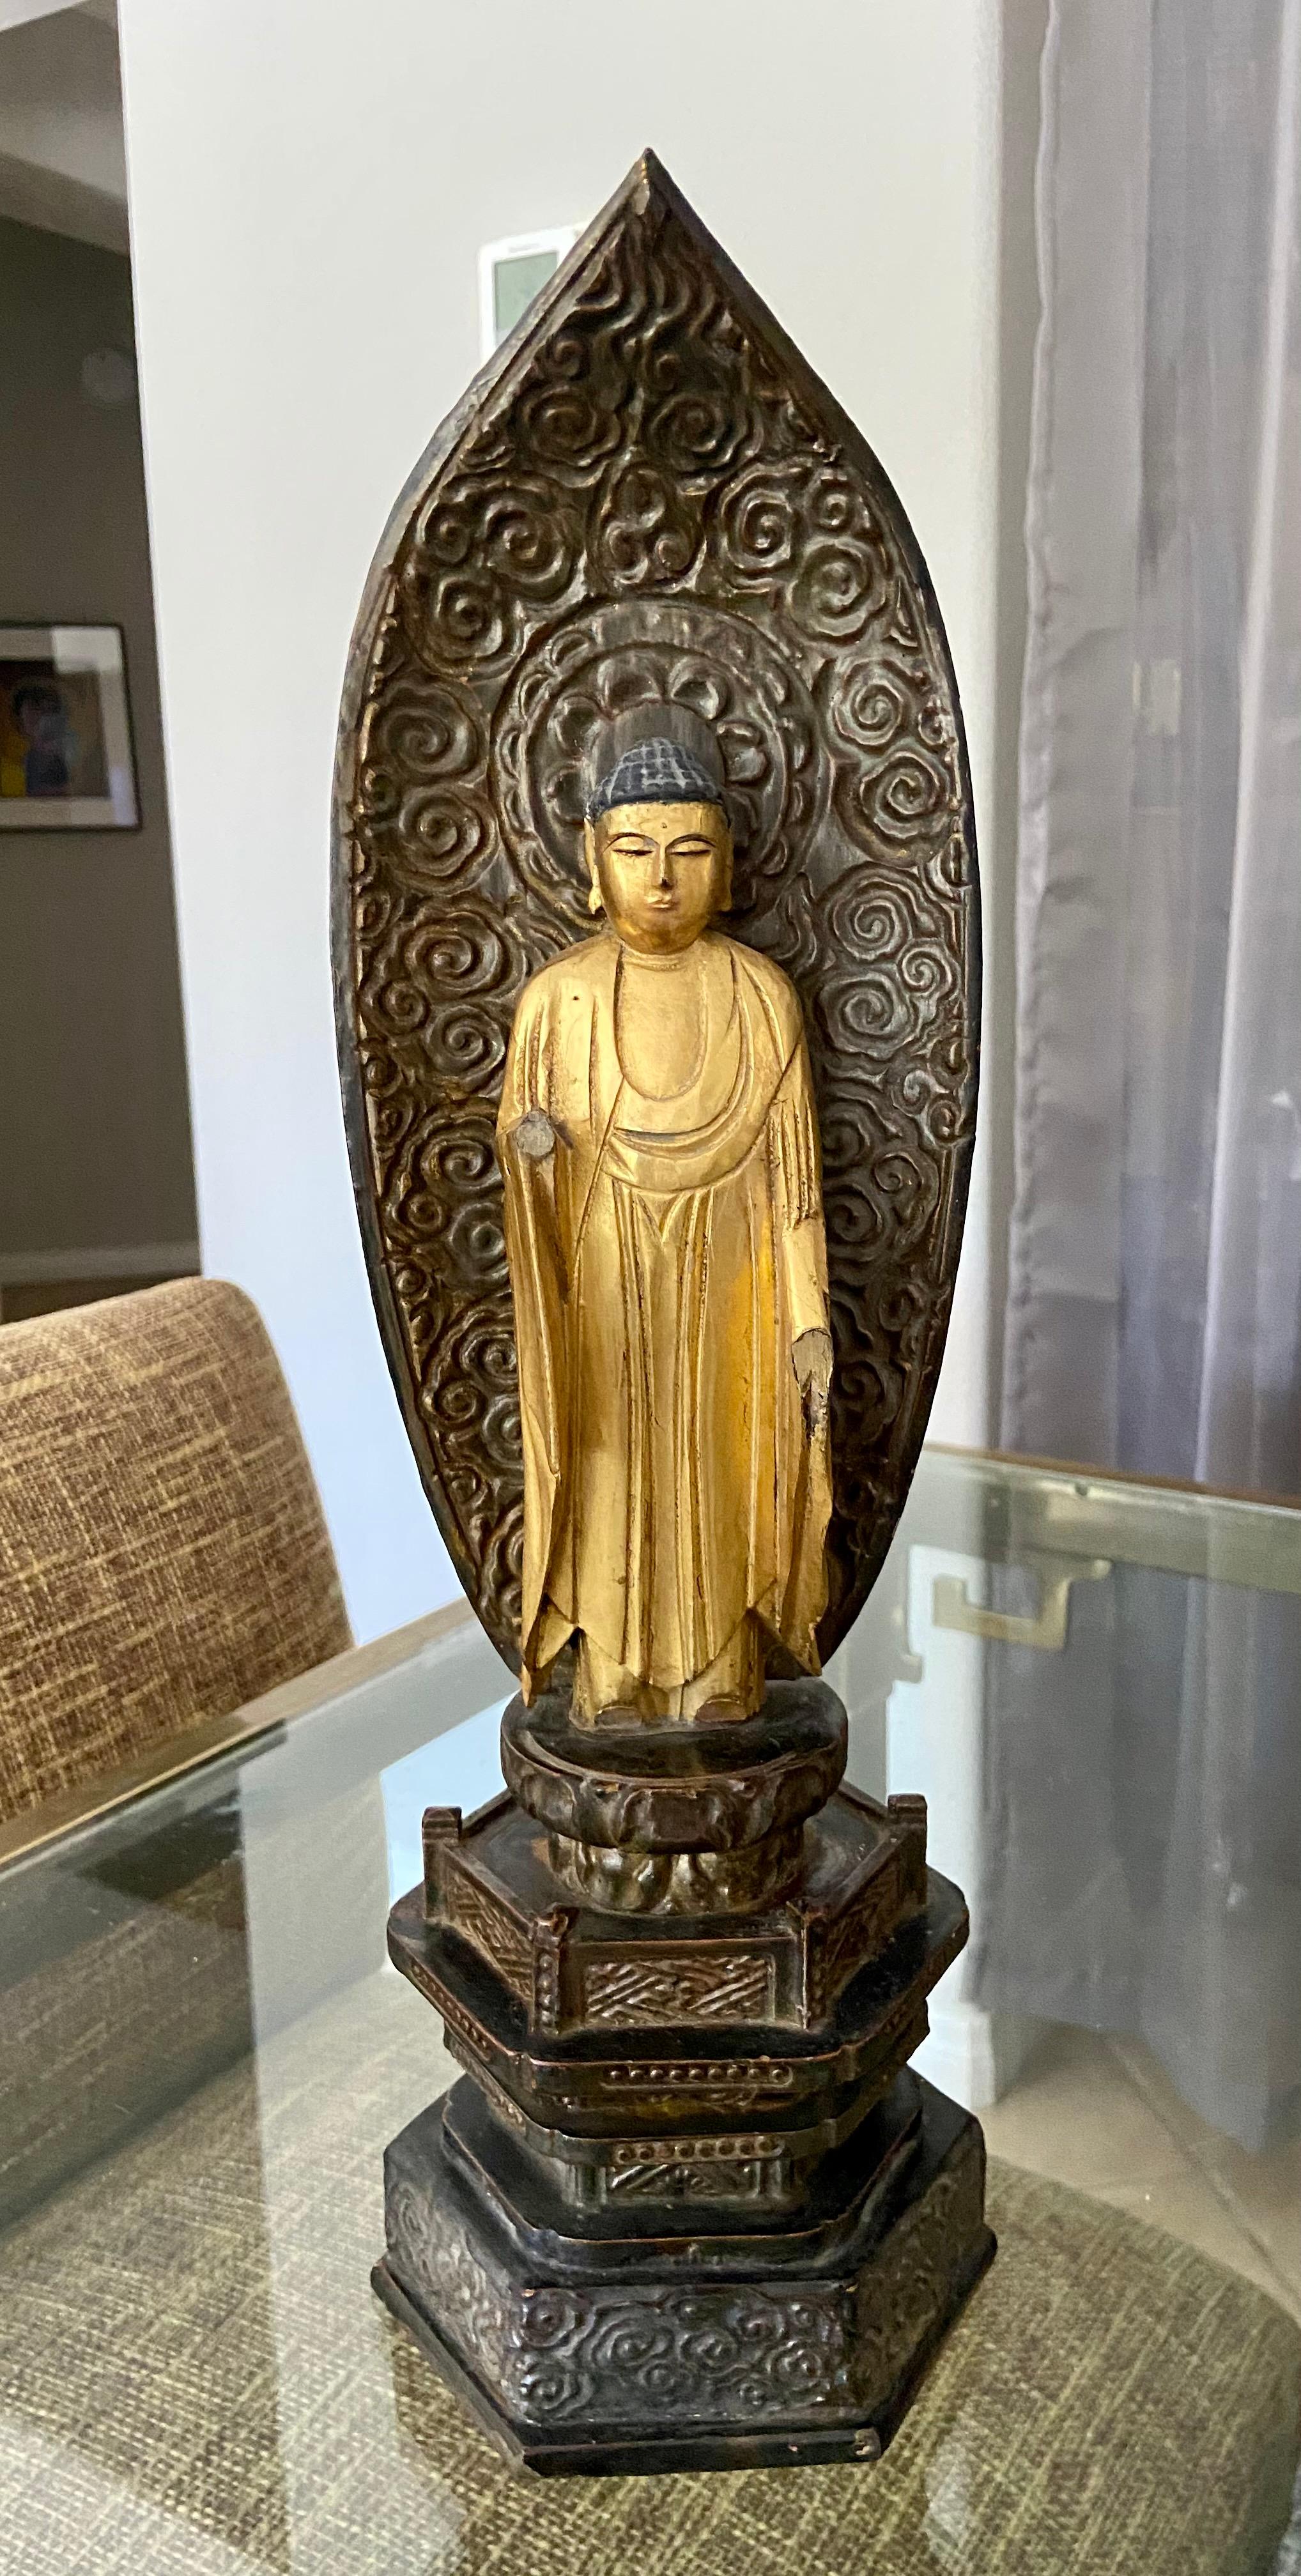 A lacquered and gilded 19th century Edo period Amida Buddha deity. Shown standing with hands in the Amida mudra , the robes draped in folds across the torso and hanging loosely across the arms, the figure set on a multi-tier lotus pedestal and